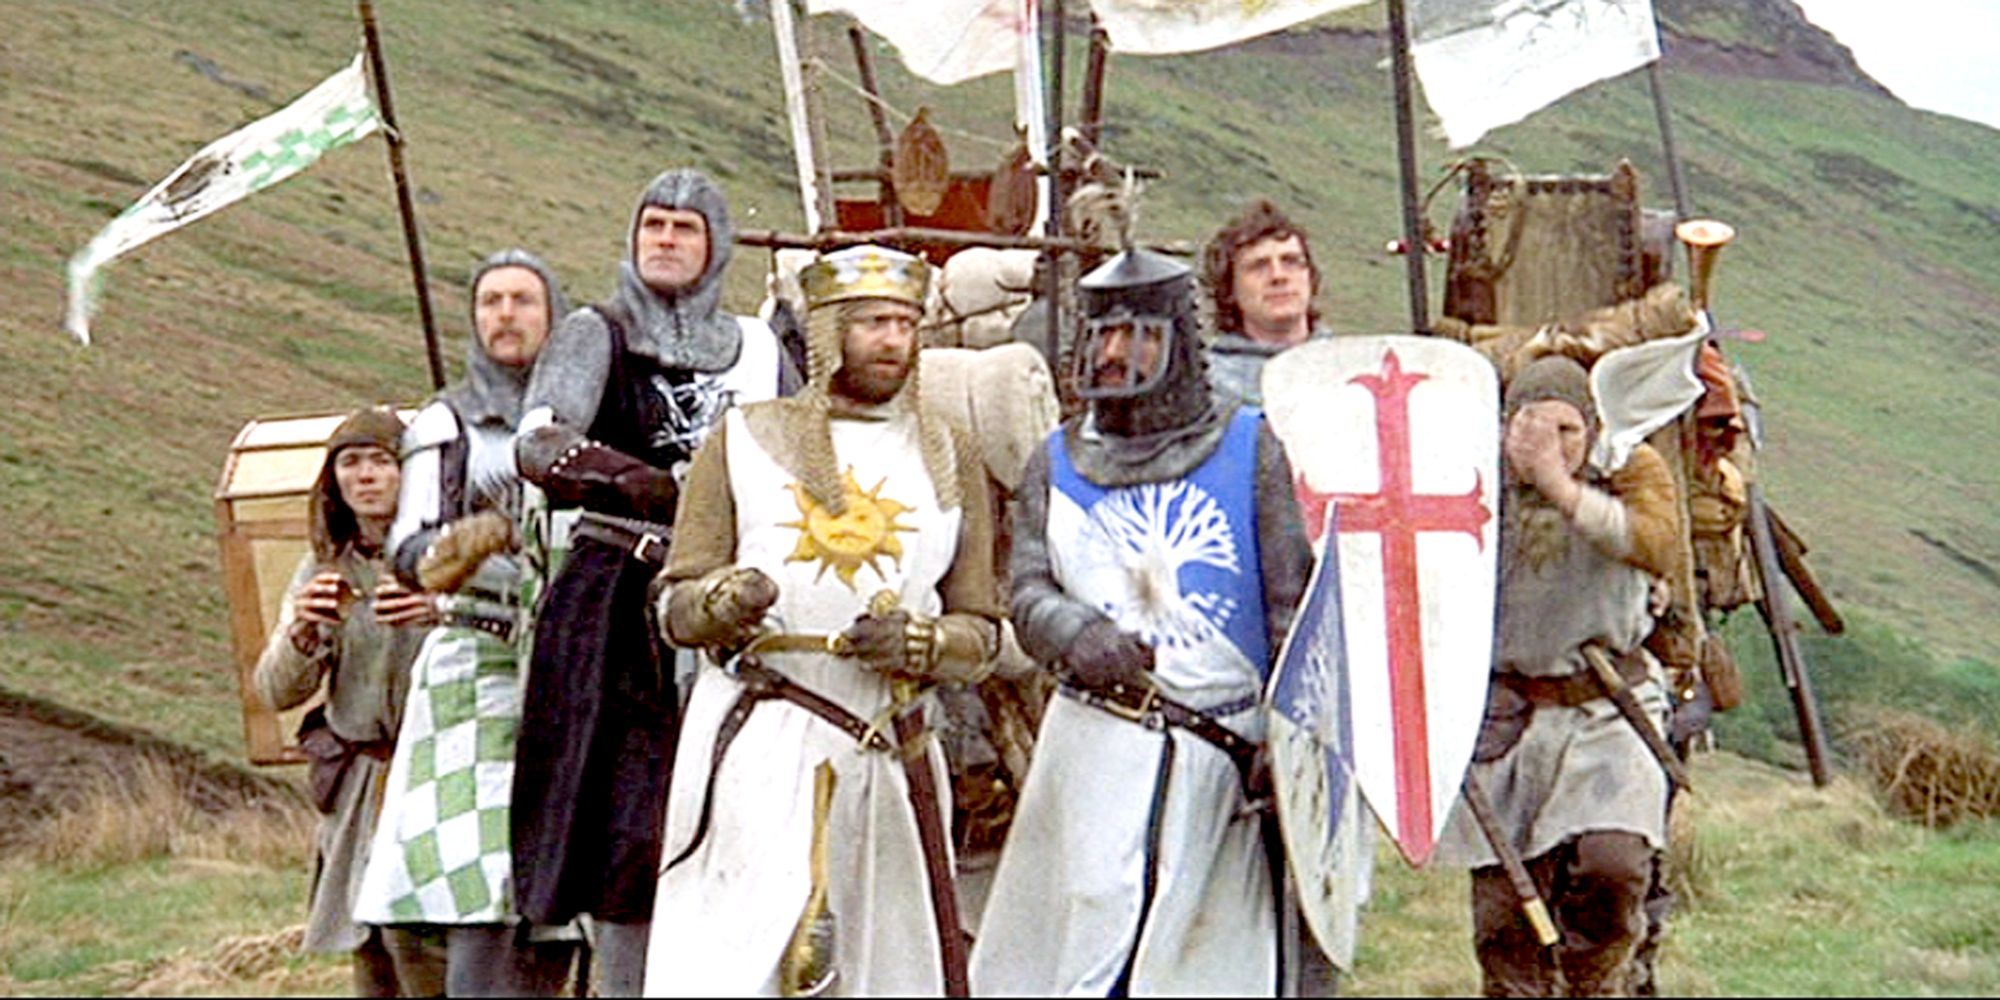 King Arthur and Co on their Quest Monty Python